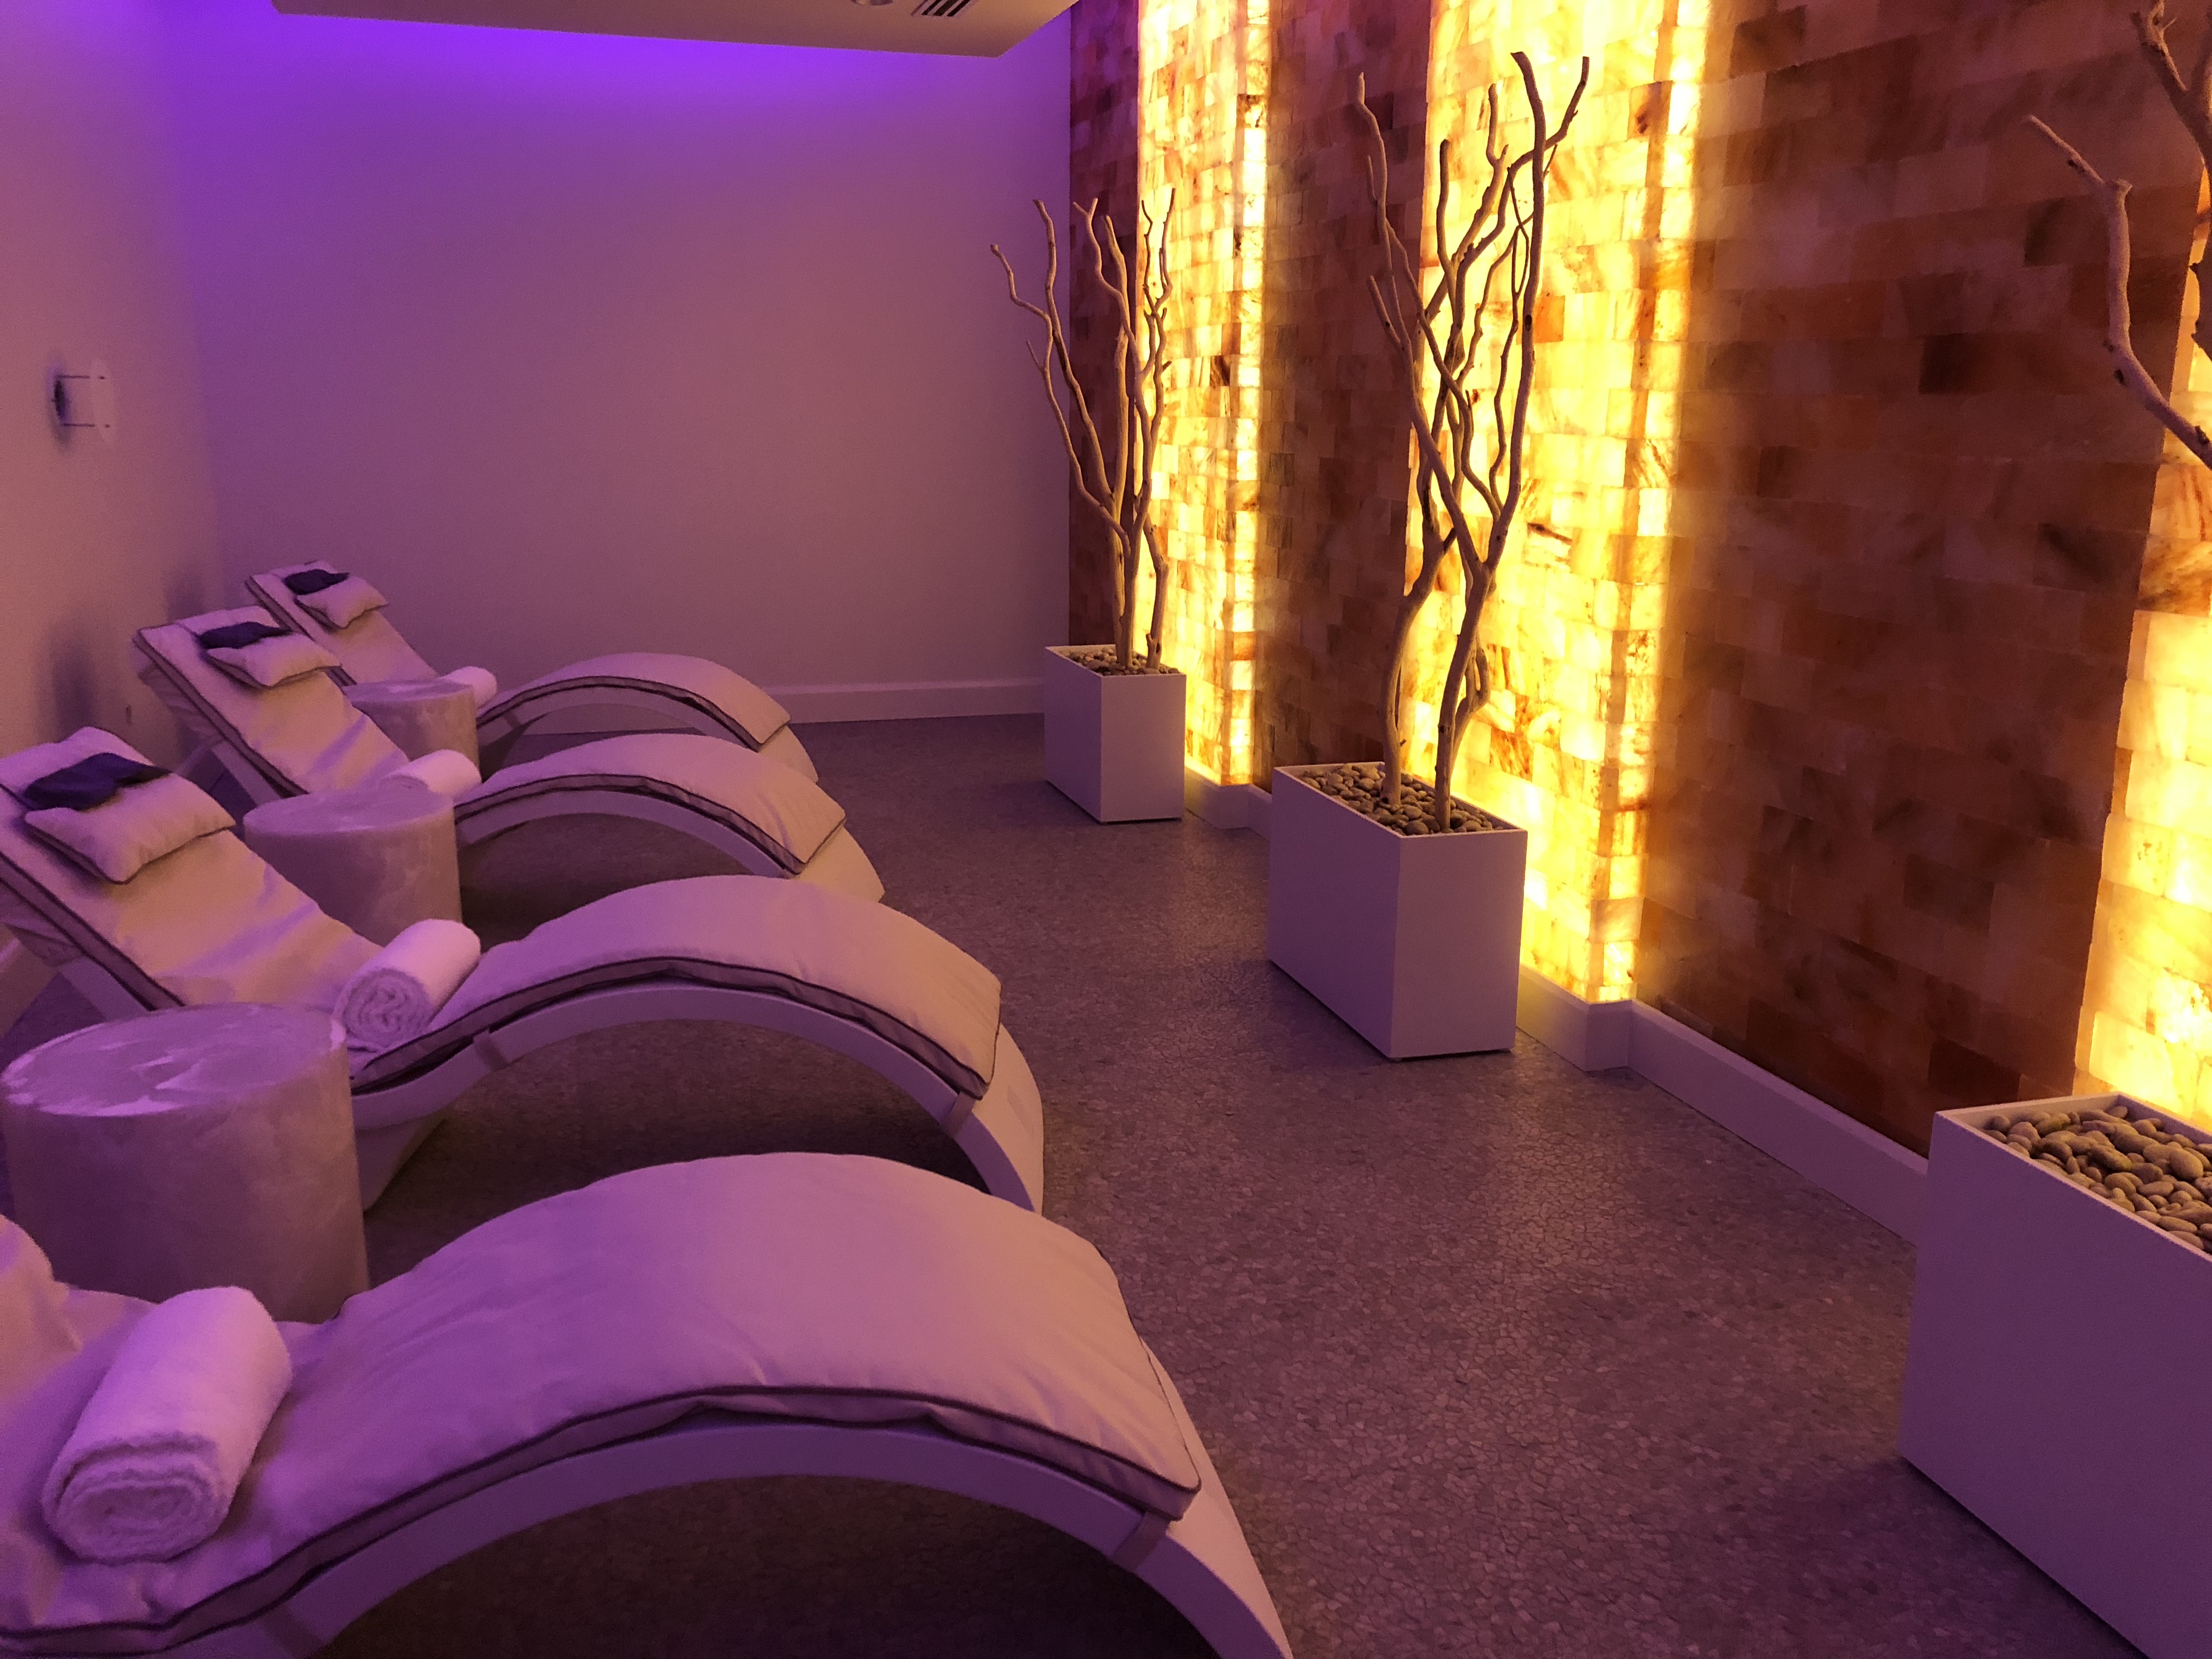 Salt Therapy Oasis offer at the Spa and Salon of St. Andrews Country Club, Boca Raton, FL.